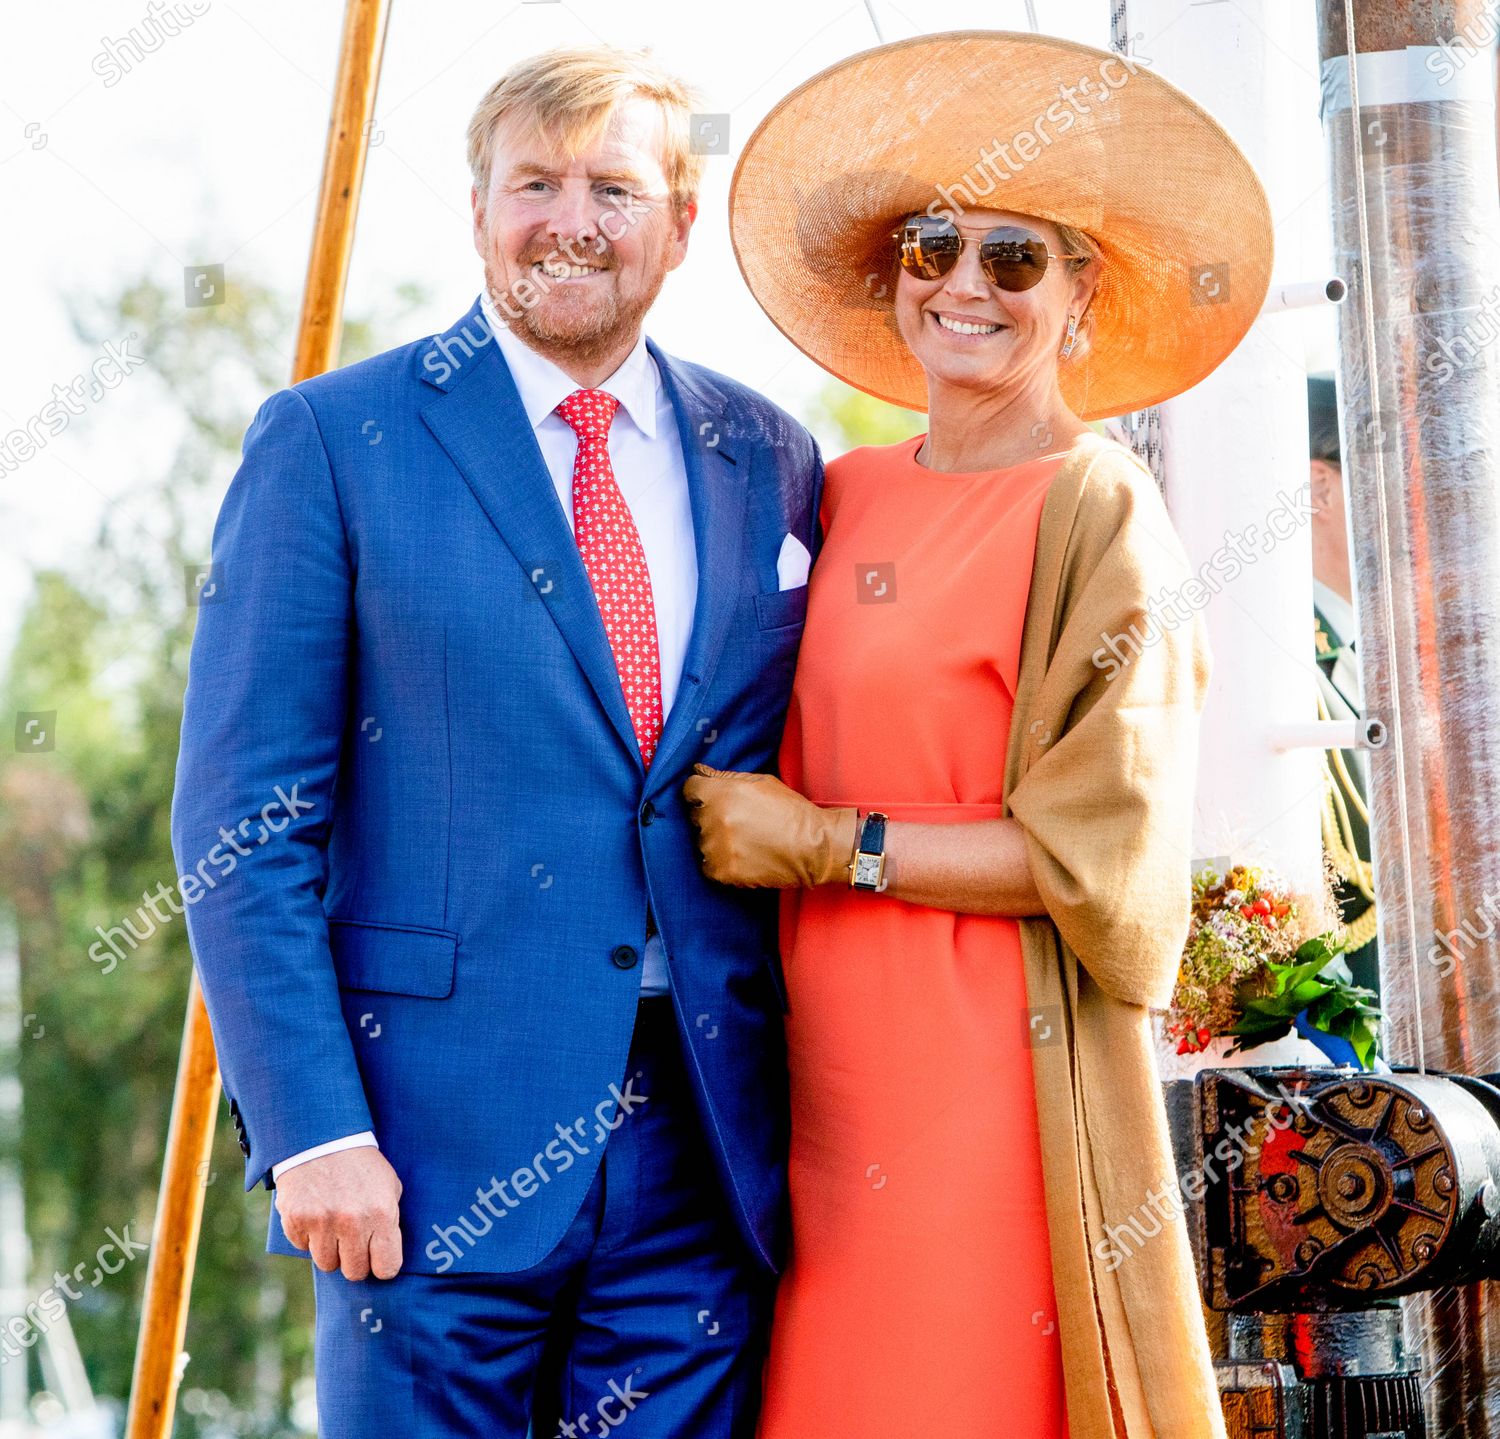 king-willem-alexander-and-queen-maxima-visit-to-south-east-friesland-the-netherlands-shutterstock-editorial-10779996ca.jpg